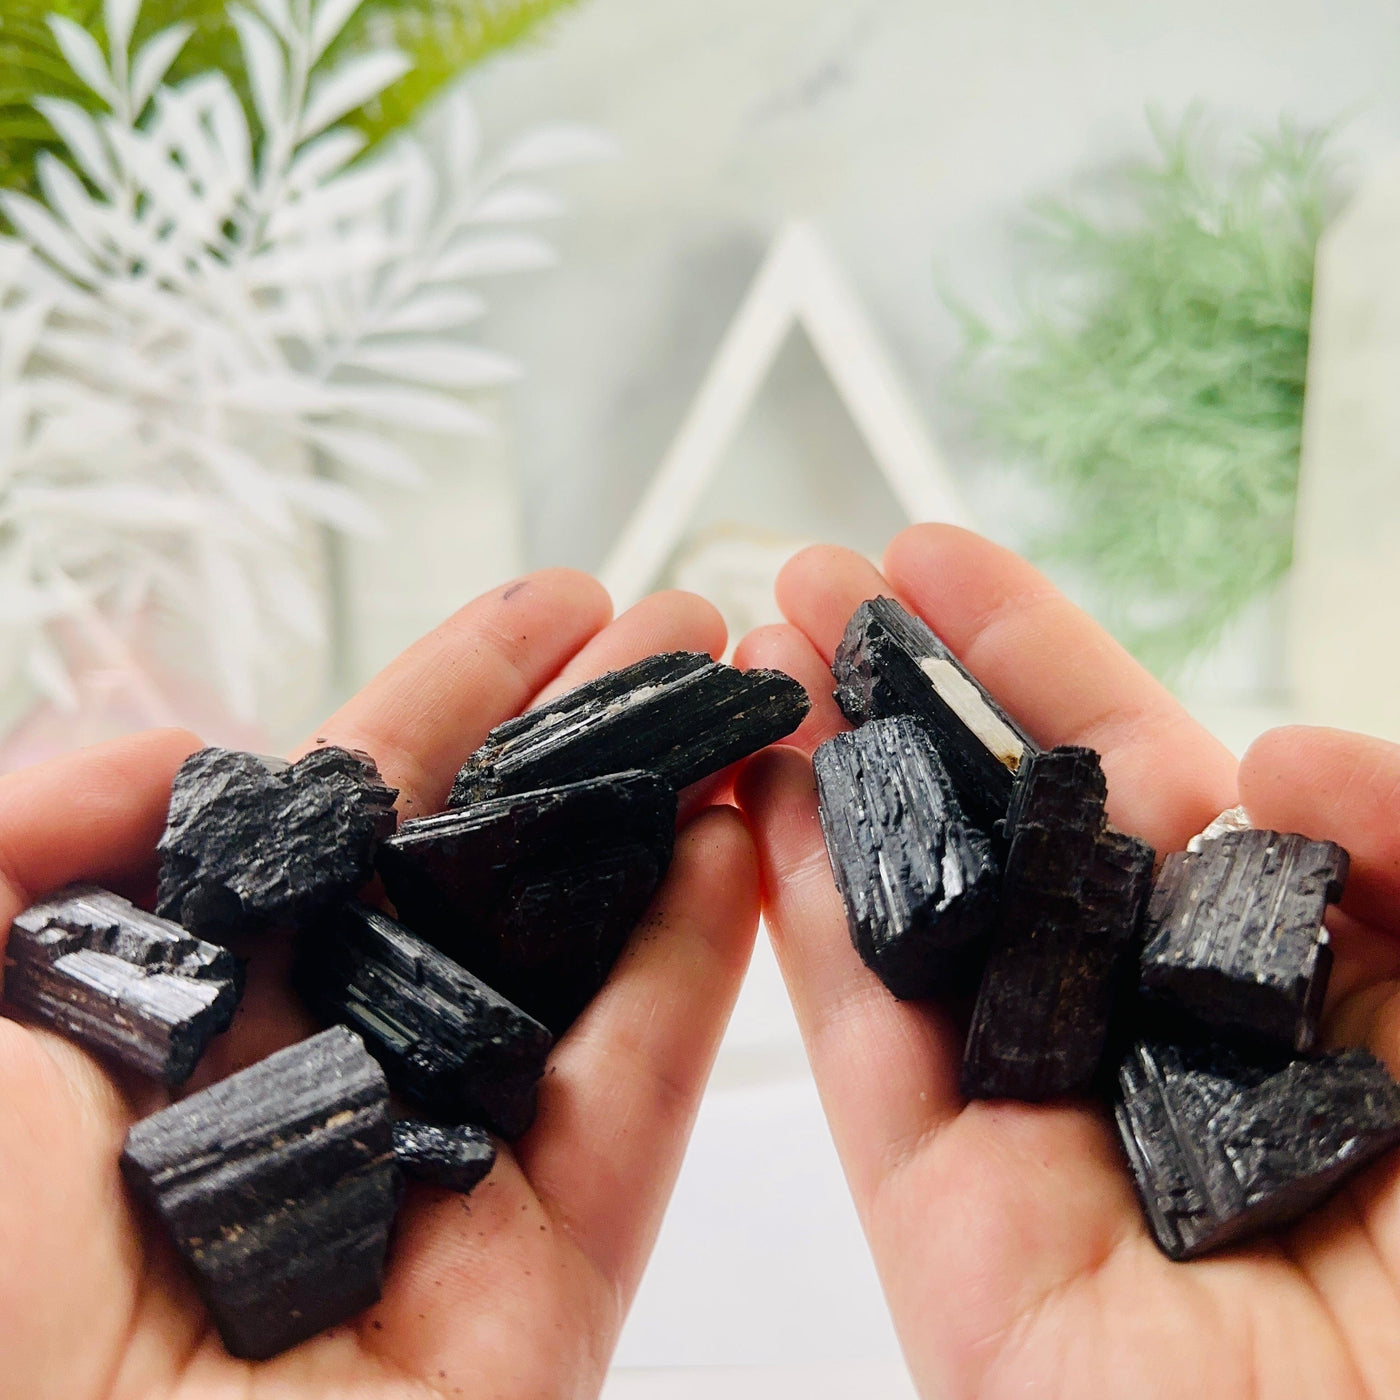 Black Tourmaline - Natural Rough Crystals - You Get All - in hand for size reference